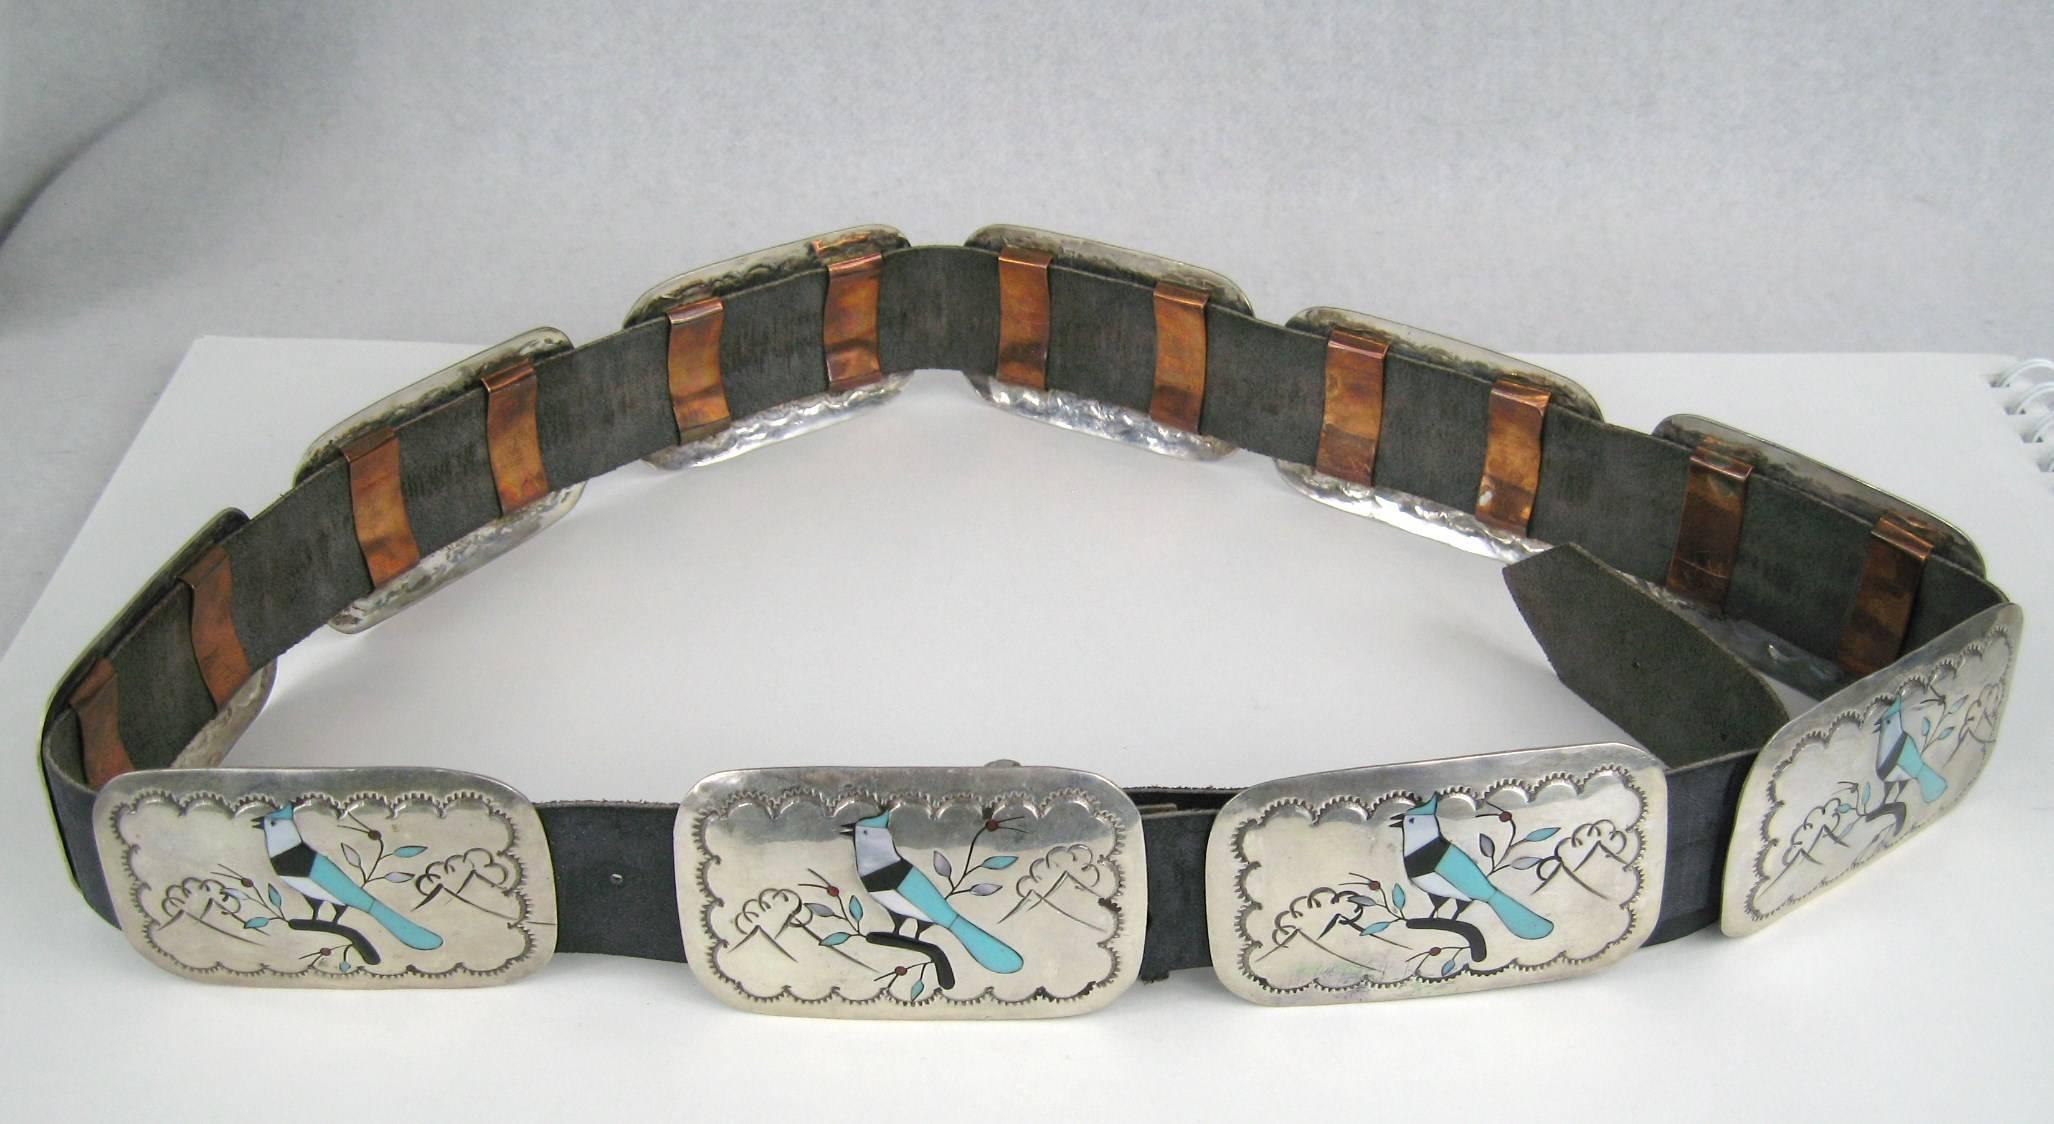 Another Fantastic Belt from our collection of Navajo, Zuni and Hopi Jewelry 
Paneled Sterling silver Concho Belt with inlaid Blue Jays
Hallmarked BB on the back side 
 
measures 44